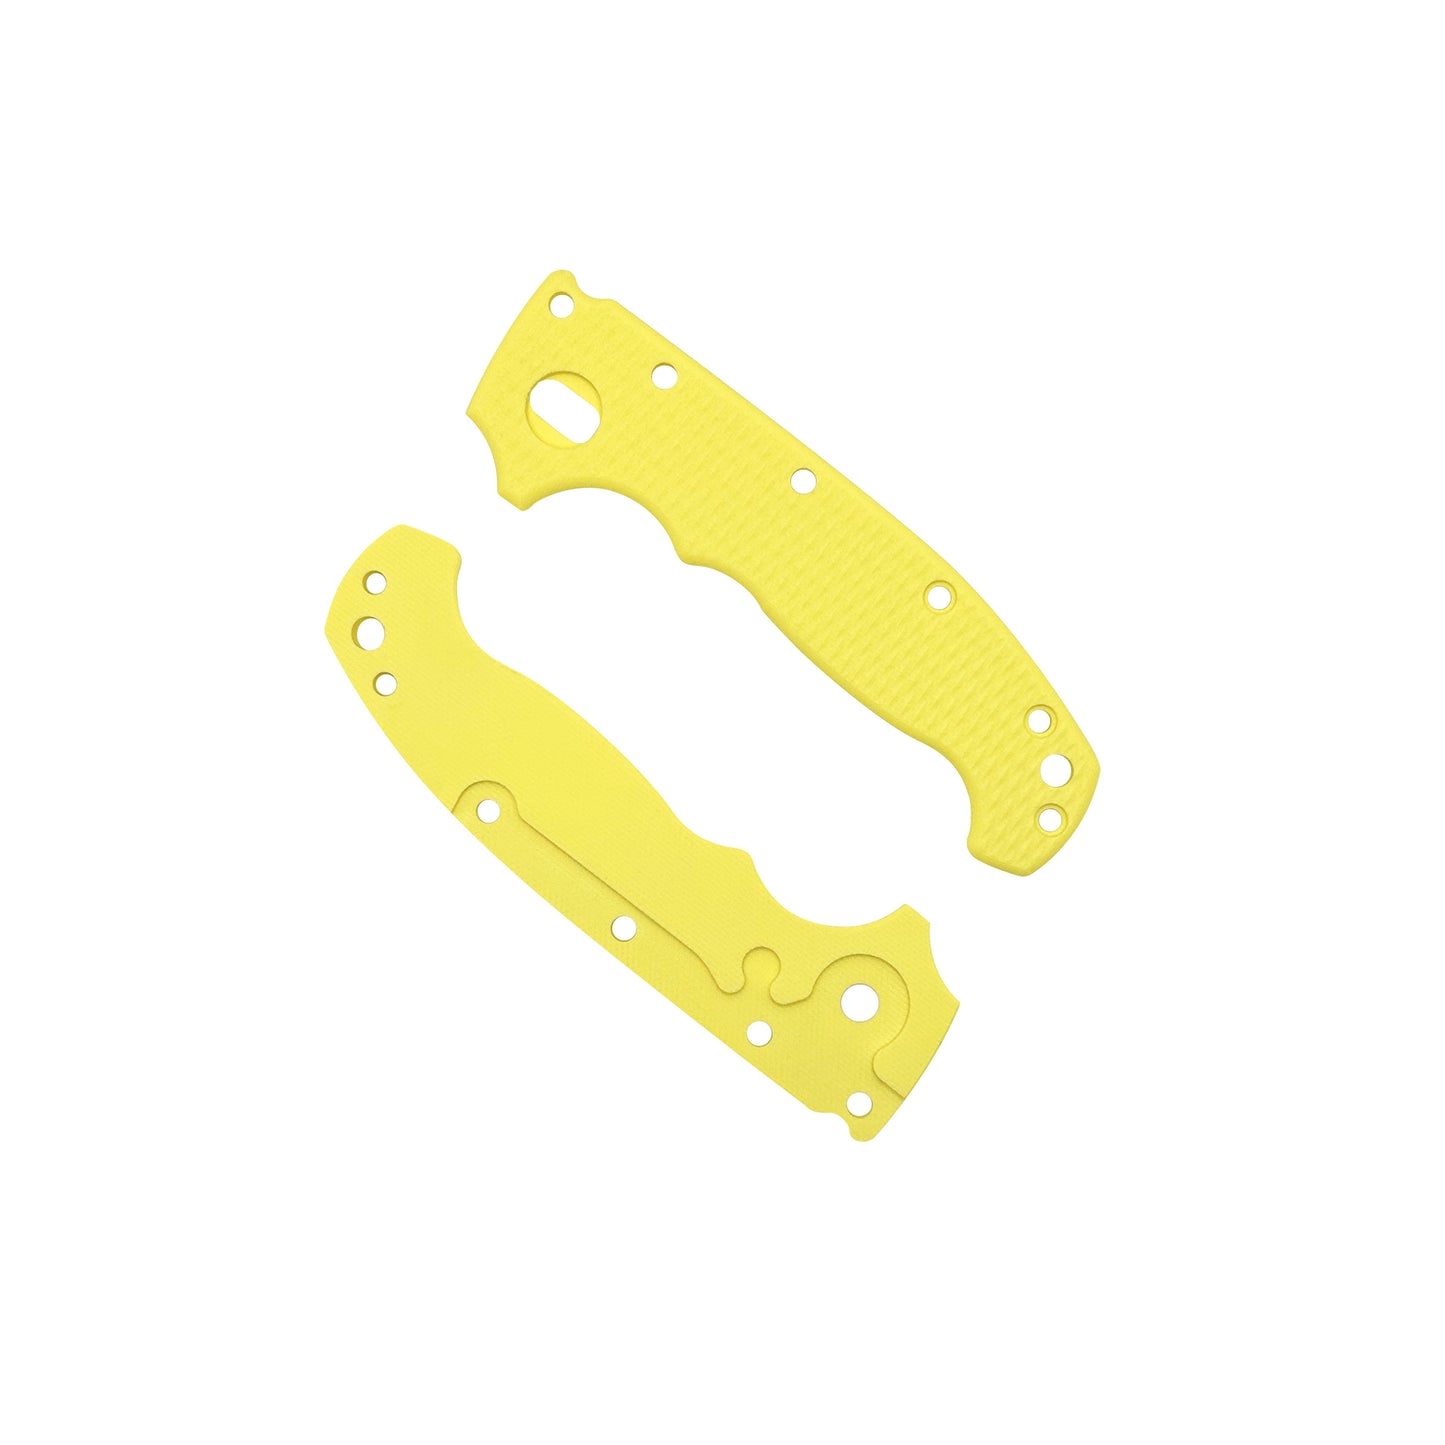 MGAD20/S Milled G10 Scales - Yellow